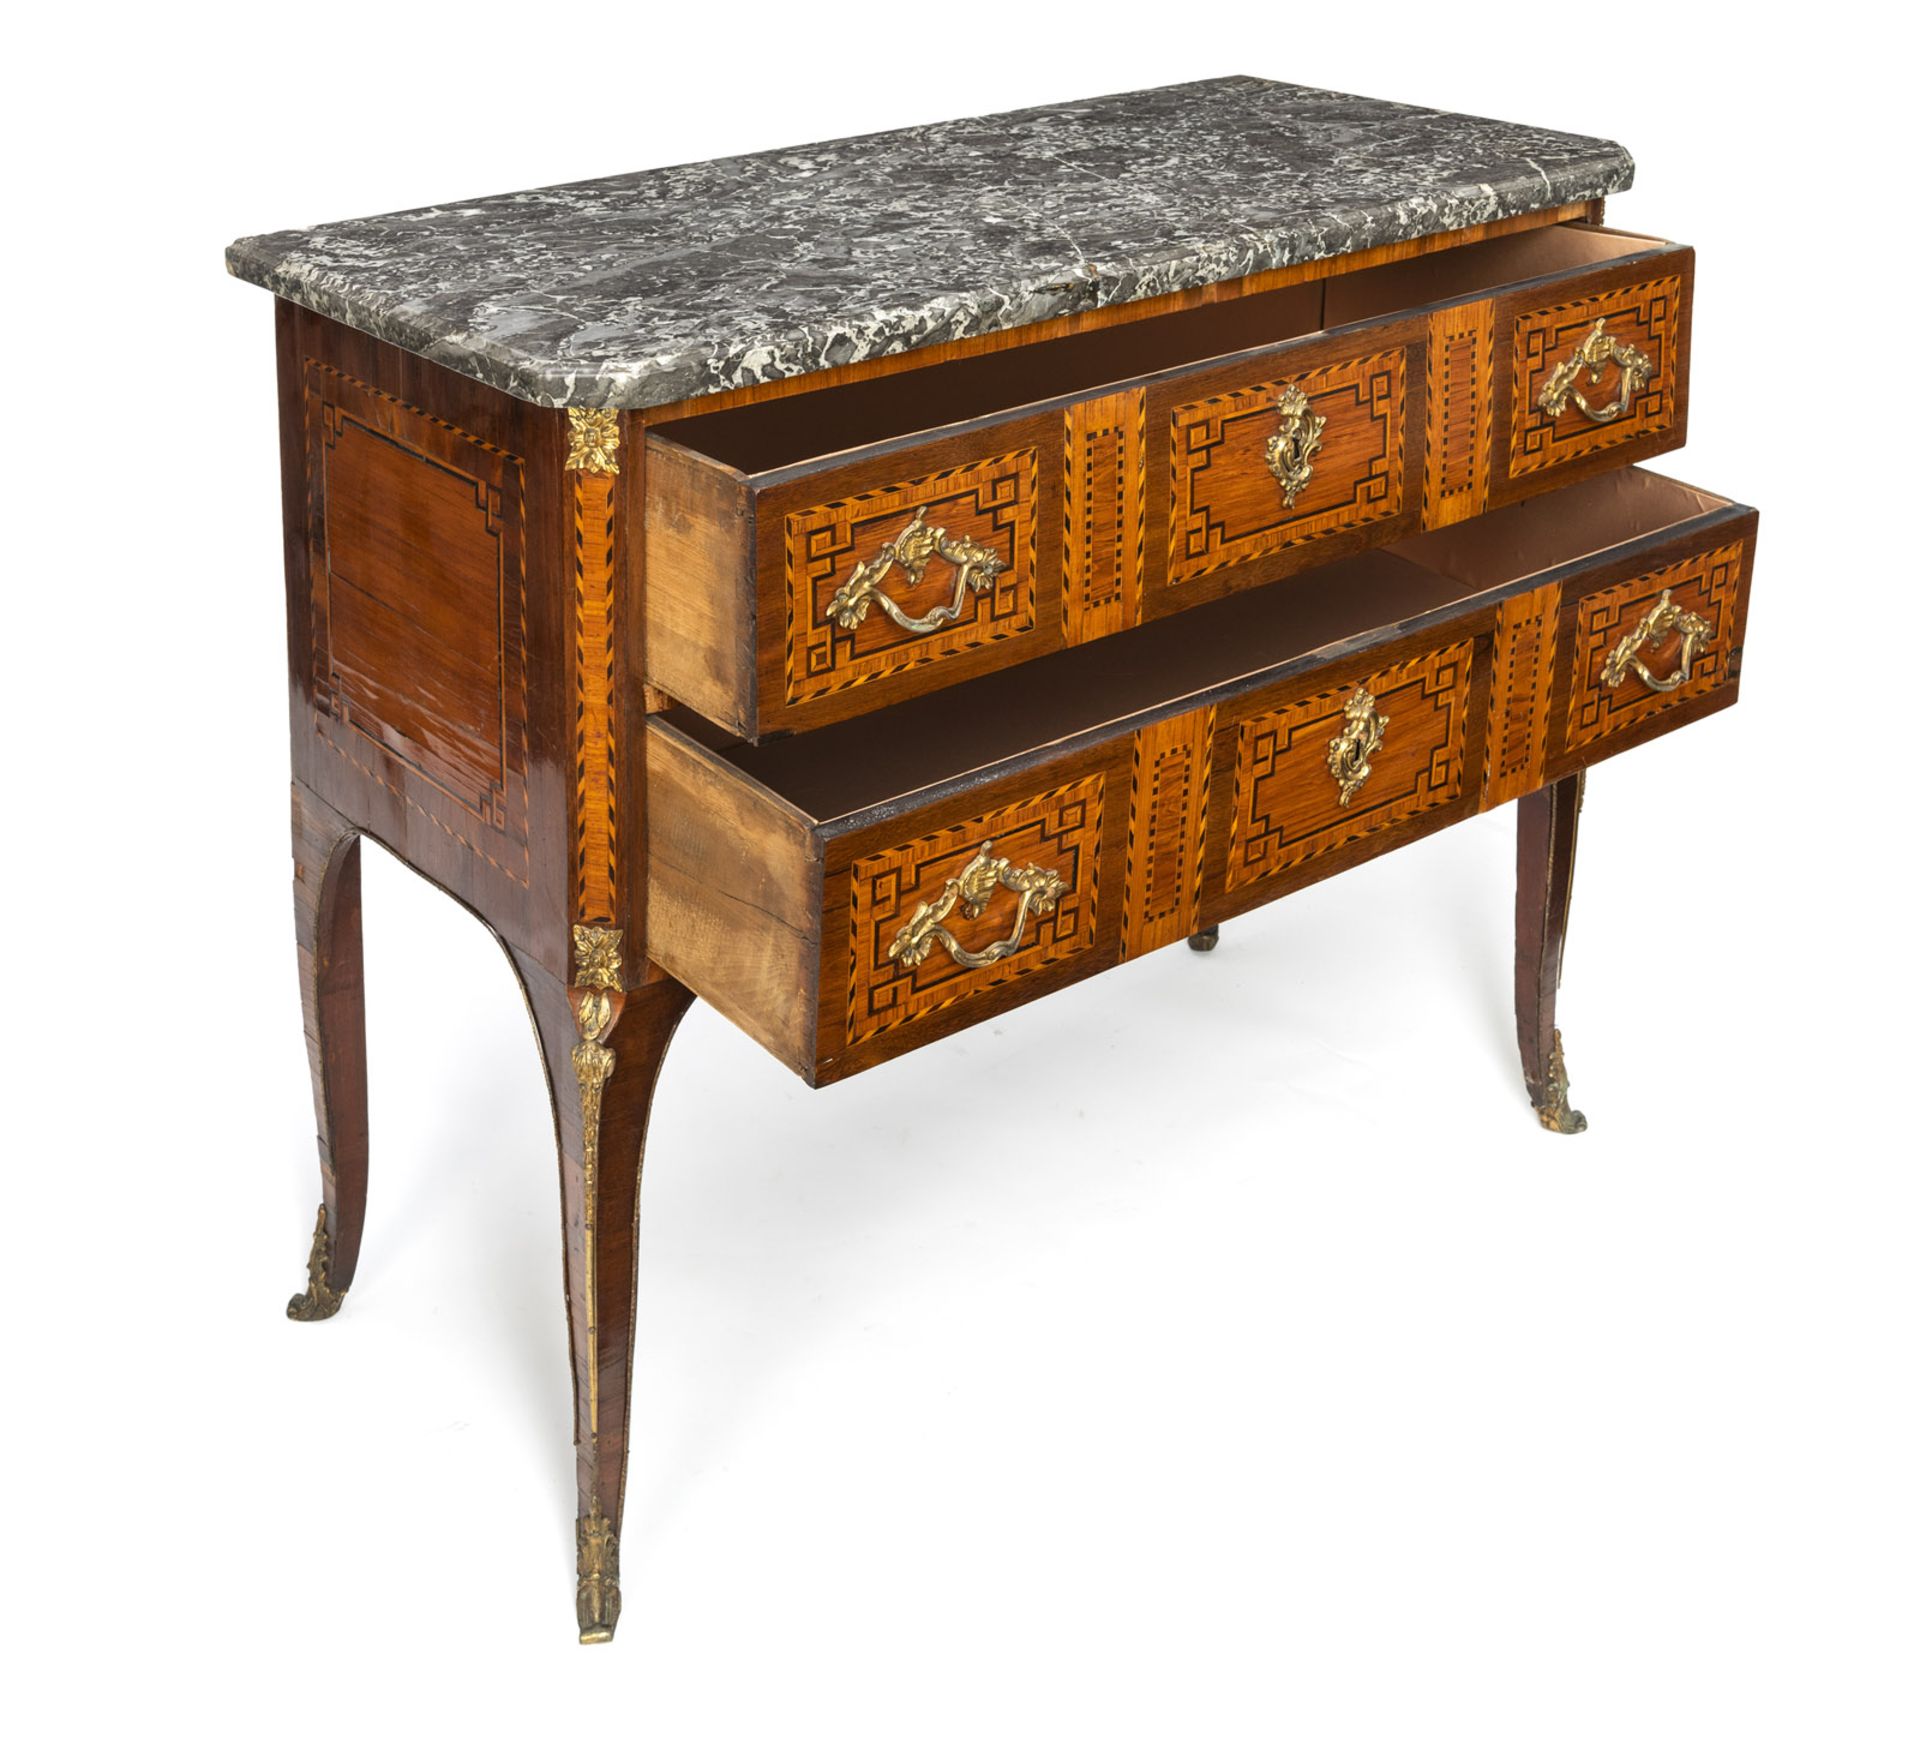 A FRENCH TRANSITIONAL STYLE ORMOLU MOUNTED KINGWOOD AMARANTH AND FRUITWOOD MARQUETRY COMMODE - Image 4 of 9